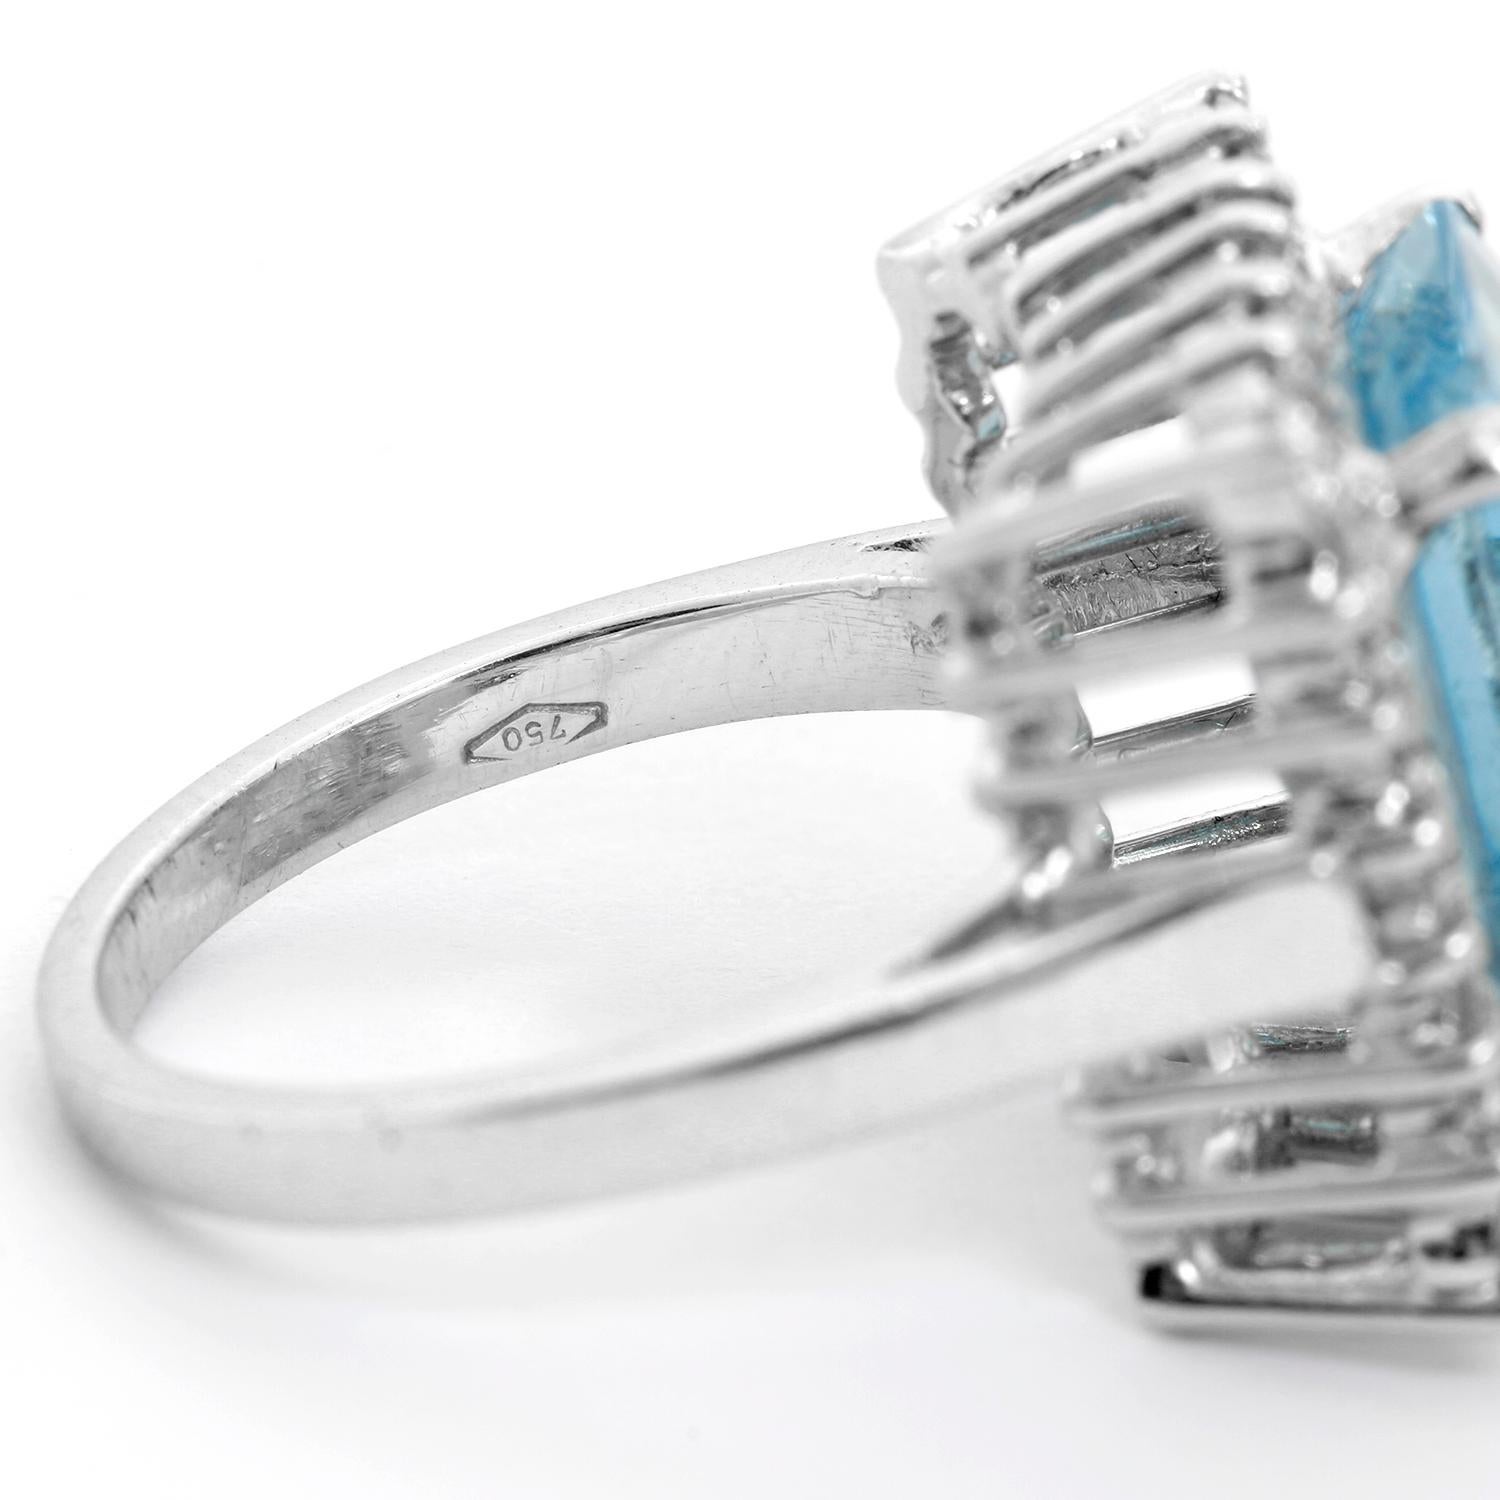 Aquamarine and Diamond Ring Size 7.5  - Step-cut aquamarine  set in 18K White gold surrounded by brilliant   cut diamonds. Approx diamond weight .50 ct. Total weight 9.5 grams.  